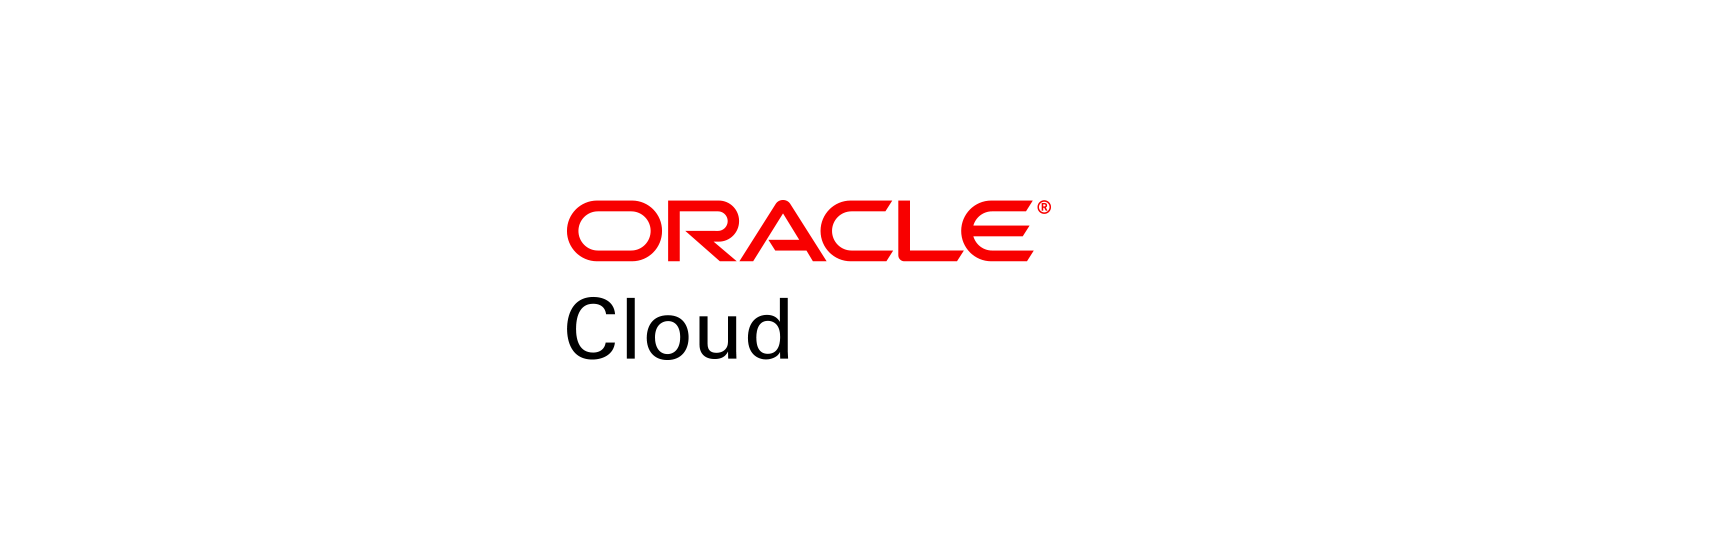 oracle coherence logo